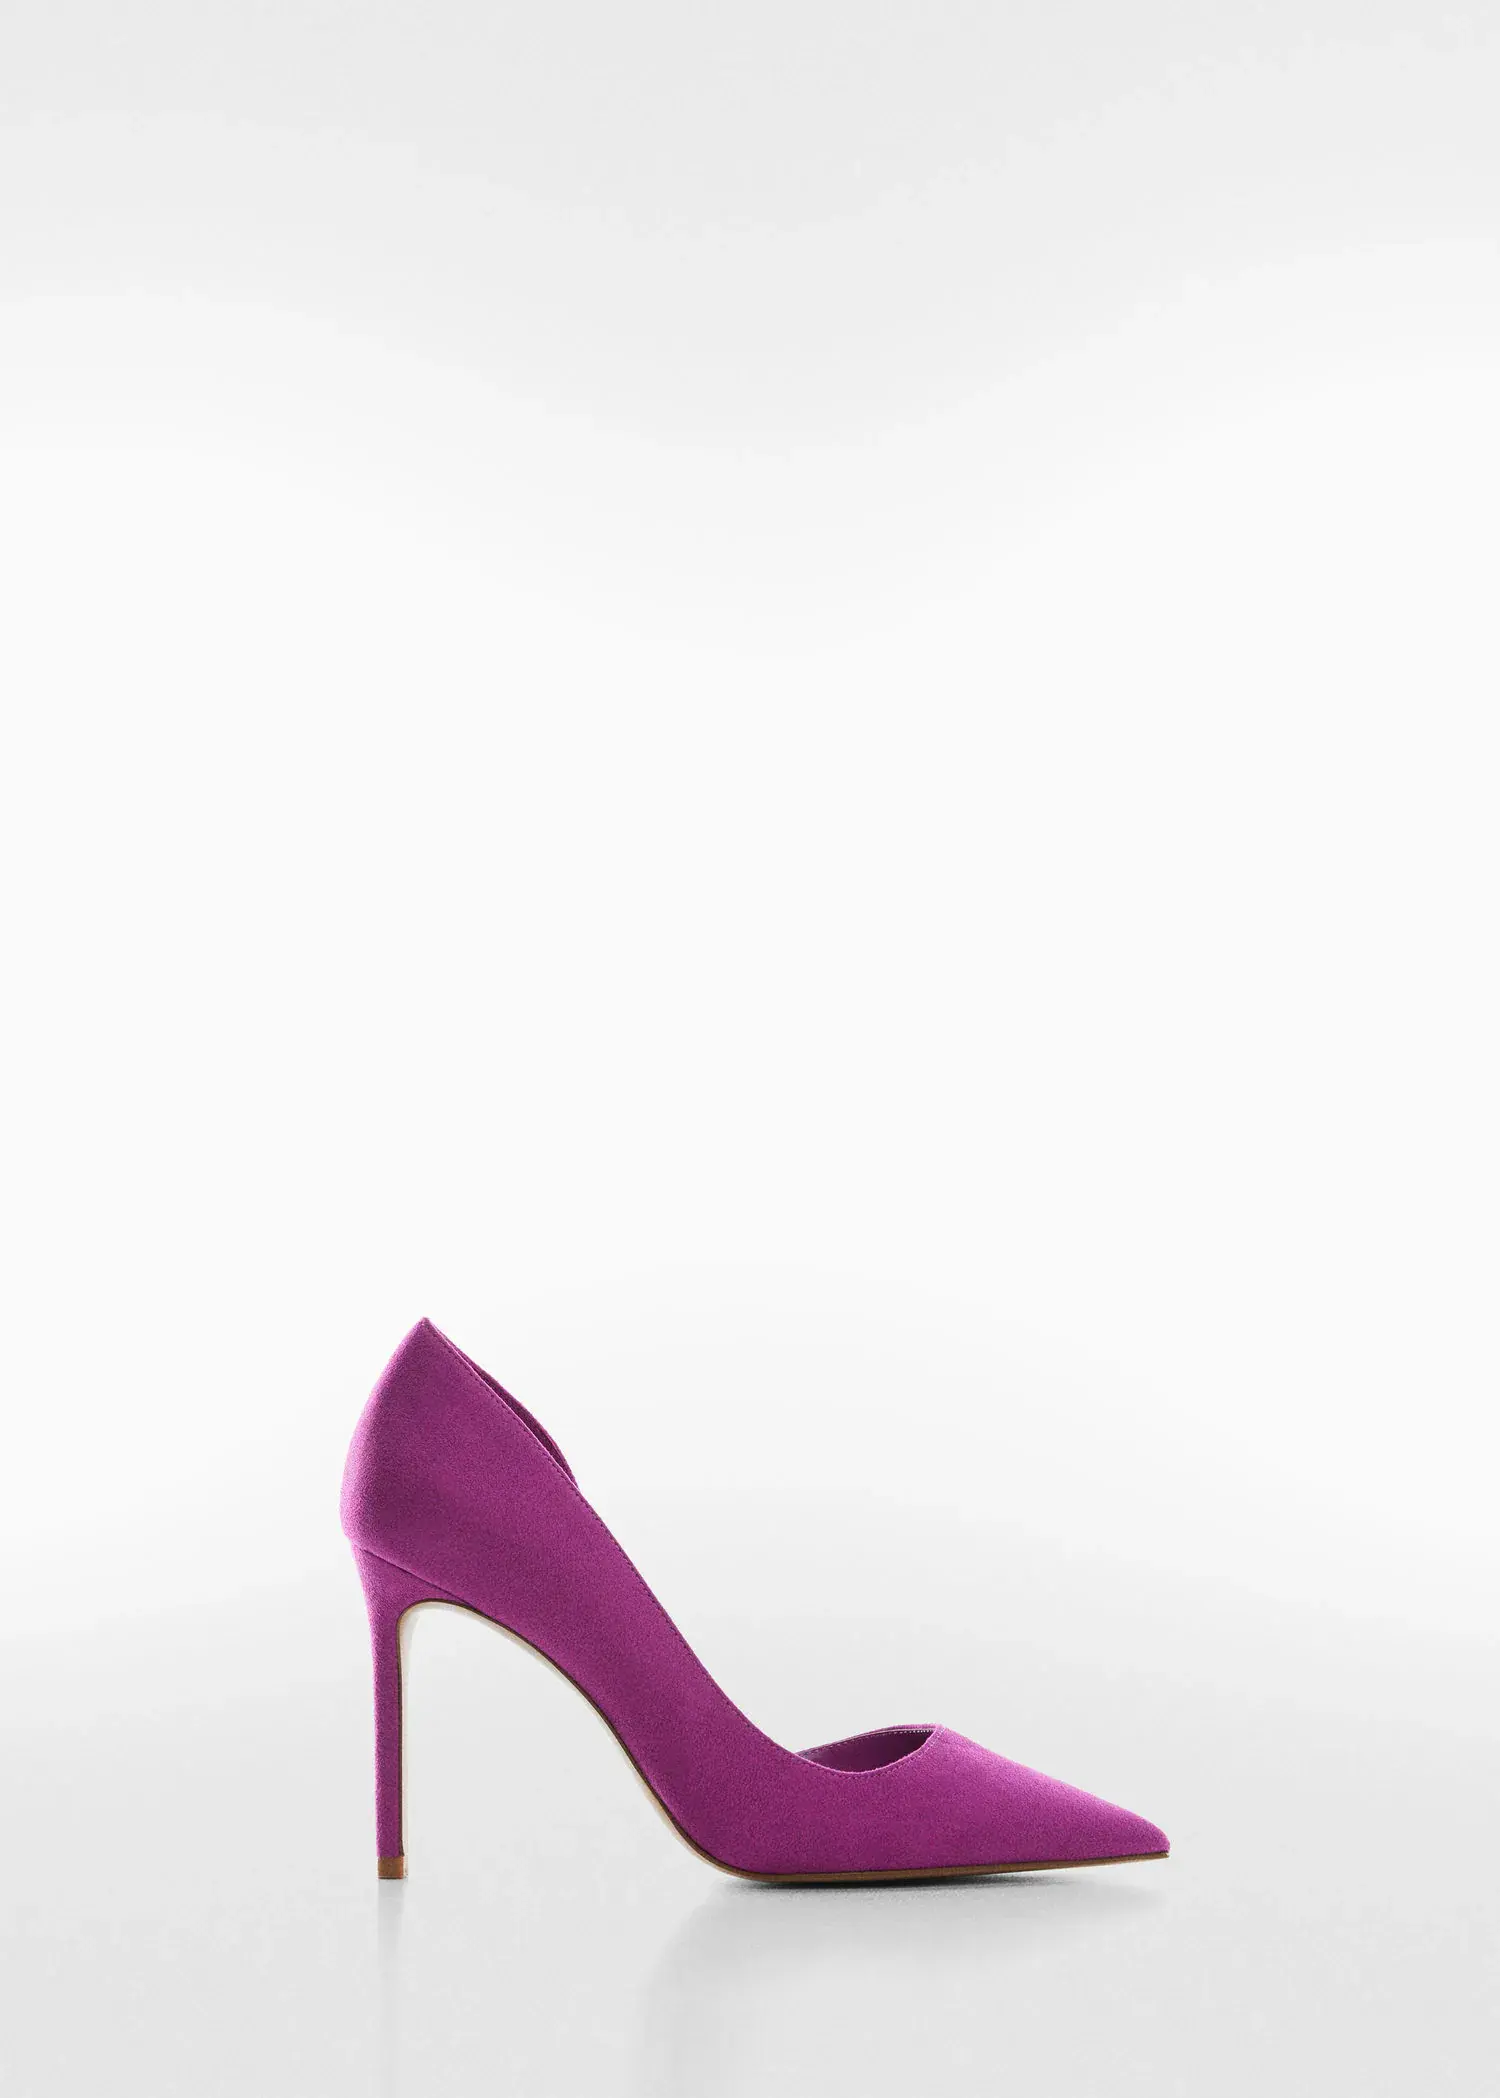 Mango Asymmetrical heeled shoes. a pair of pink shoes on a white background 